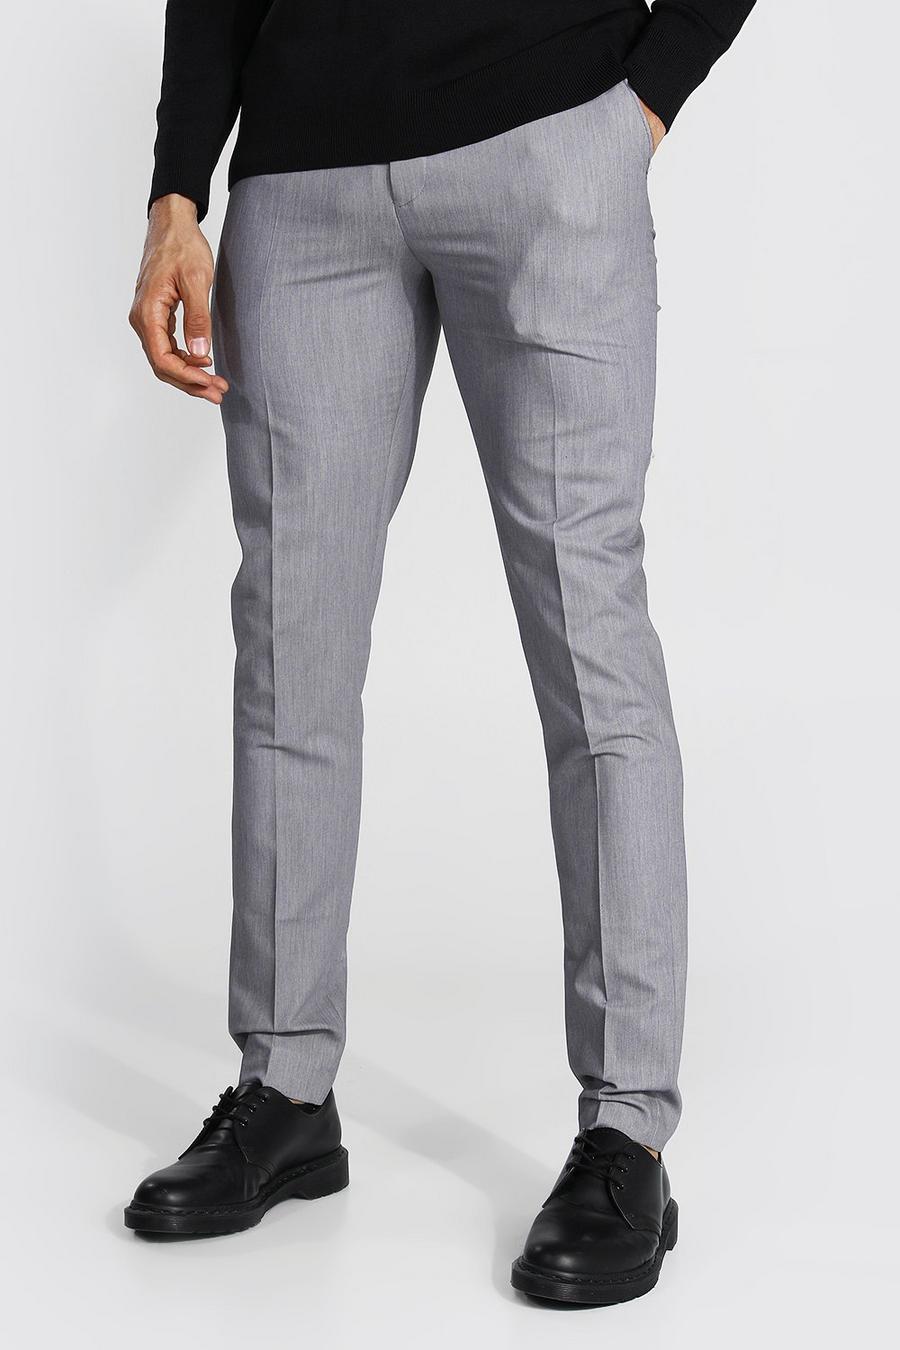 Grey Tall Skinny Fit Pants image number 1